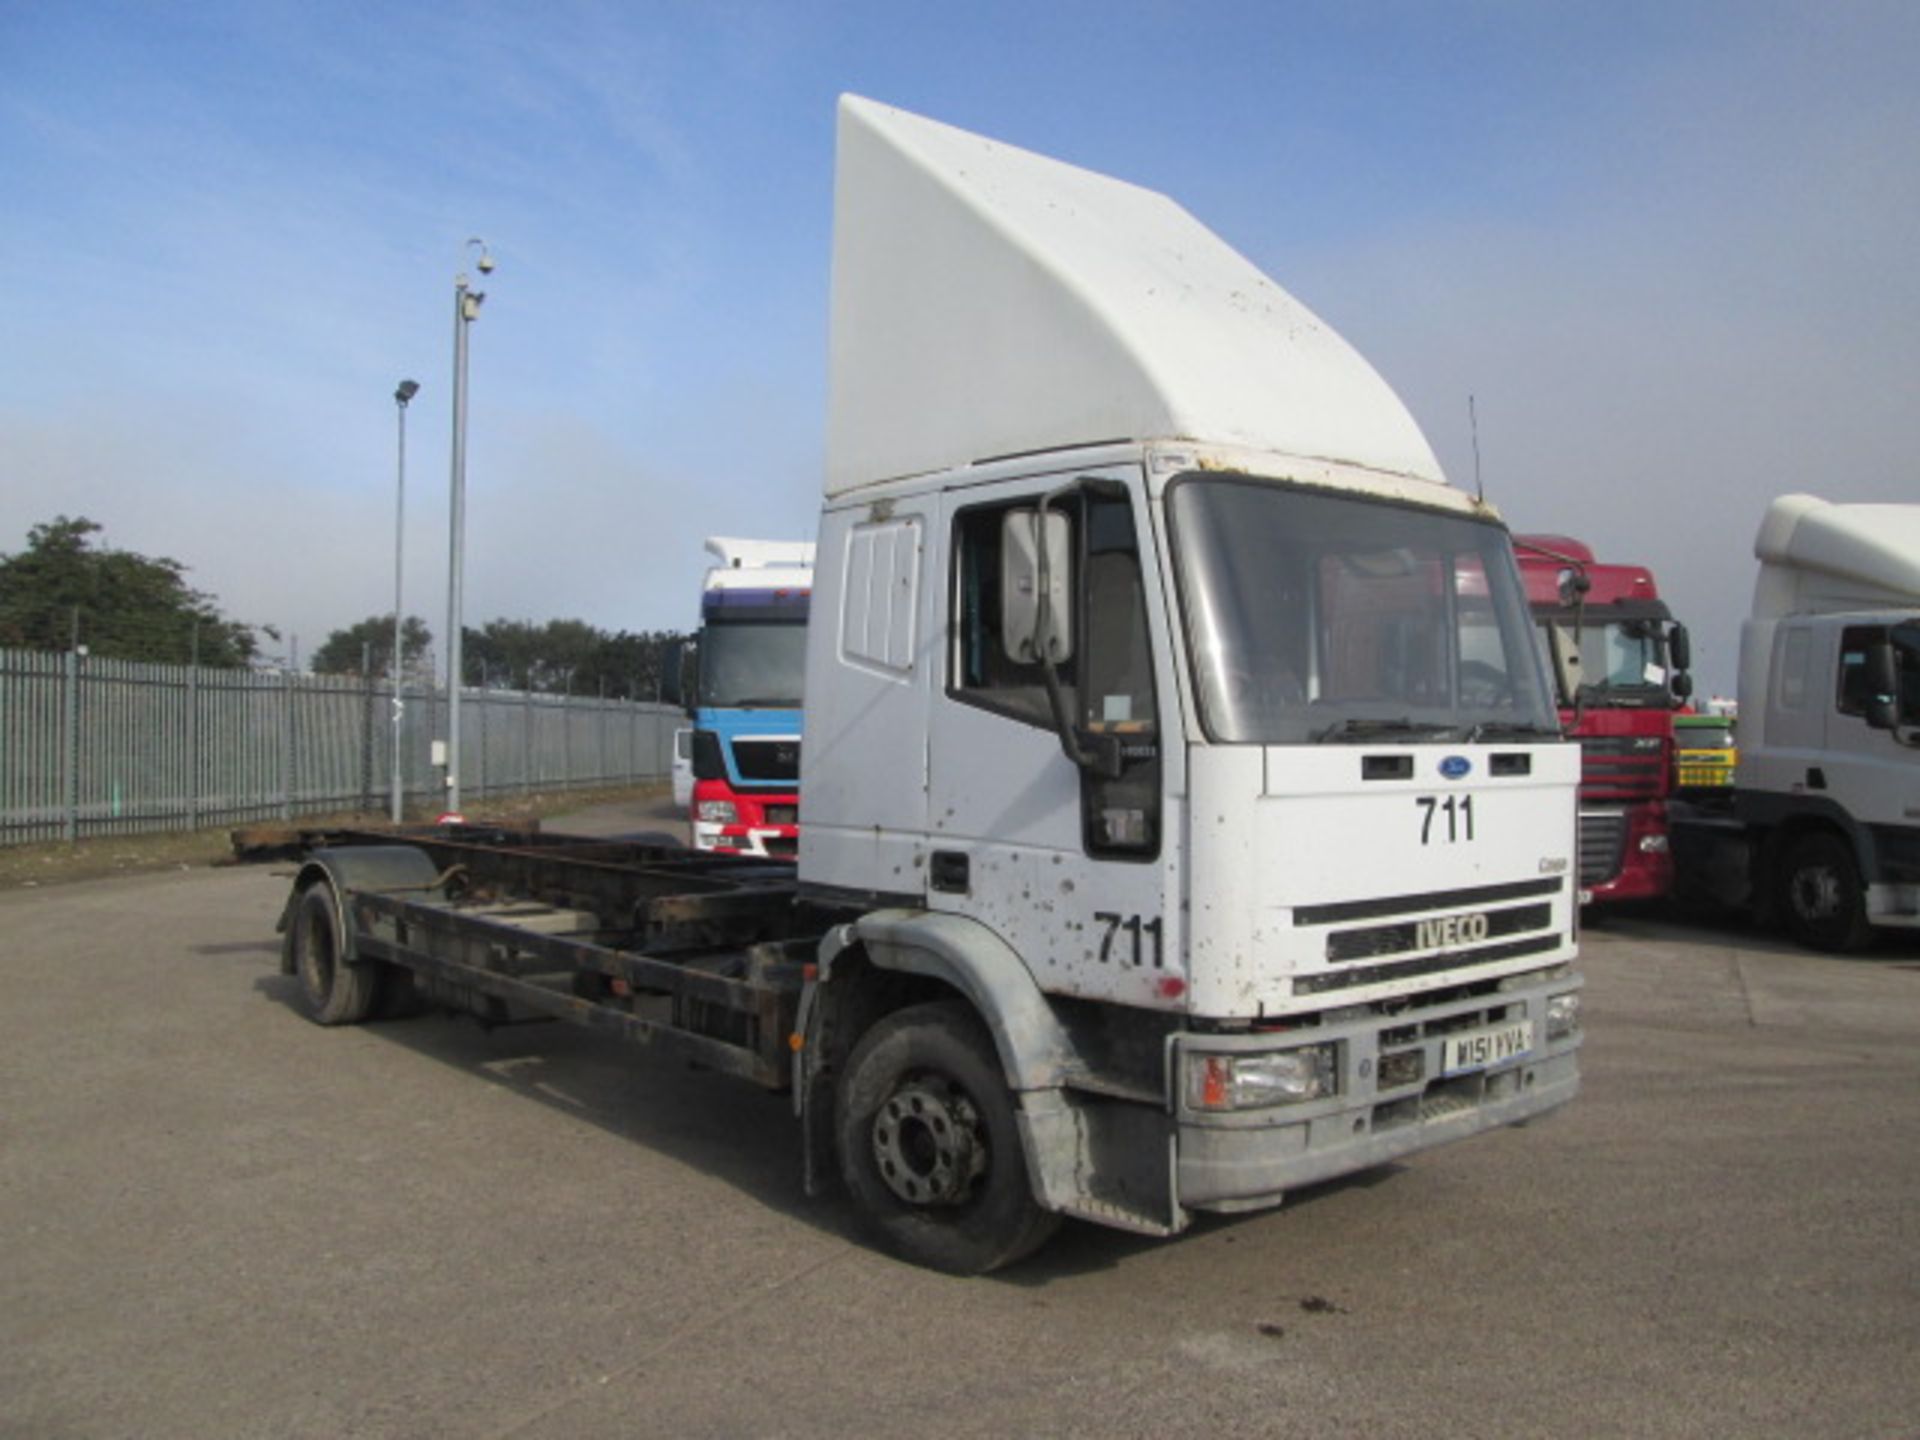 IVECO-FORD CARGO 140 E23 - 5861cc Sleeper Cab Diesel - VIN: SBCA1LG0002332526 - Year: 2000 - 784,300 - Image 2 of 6